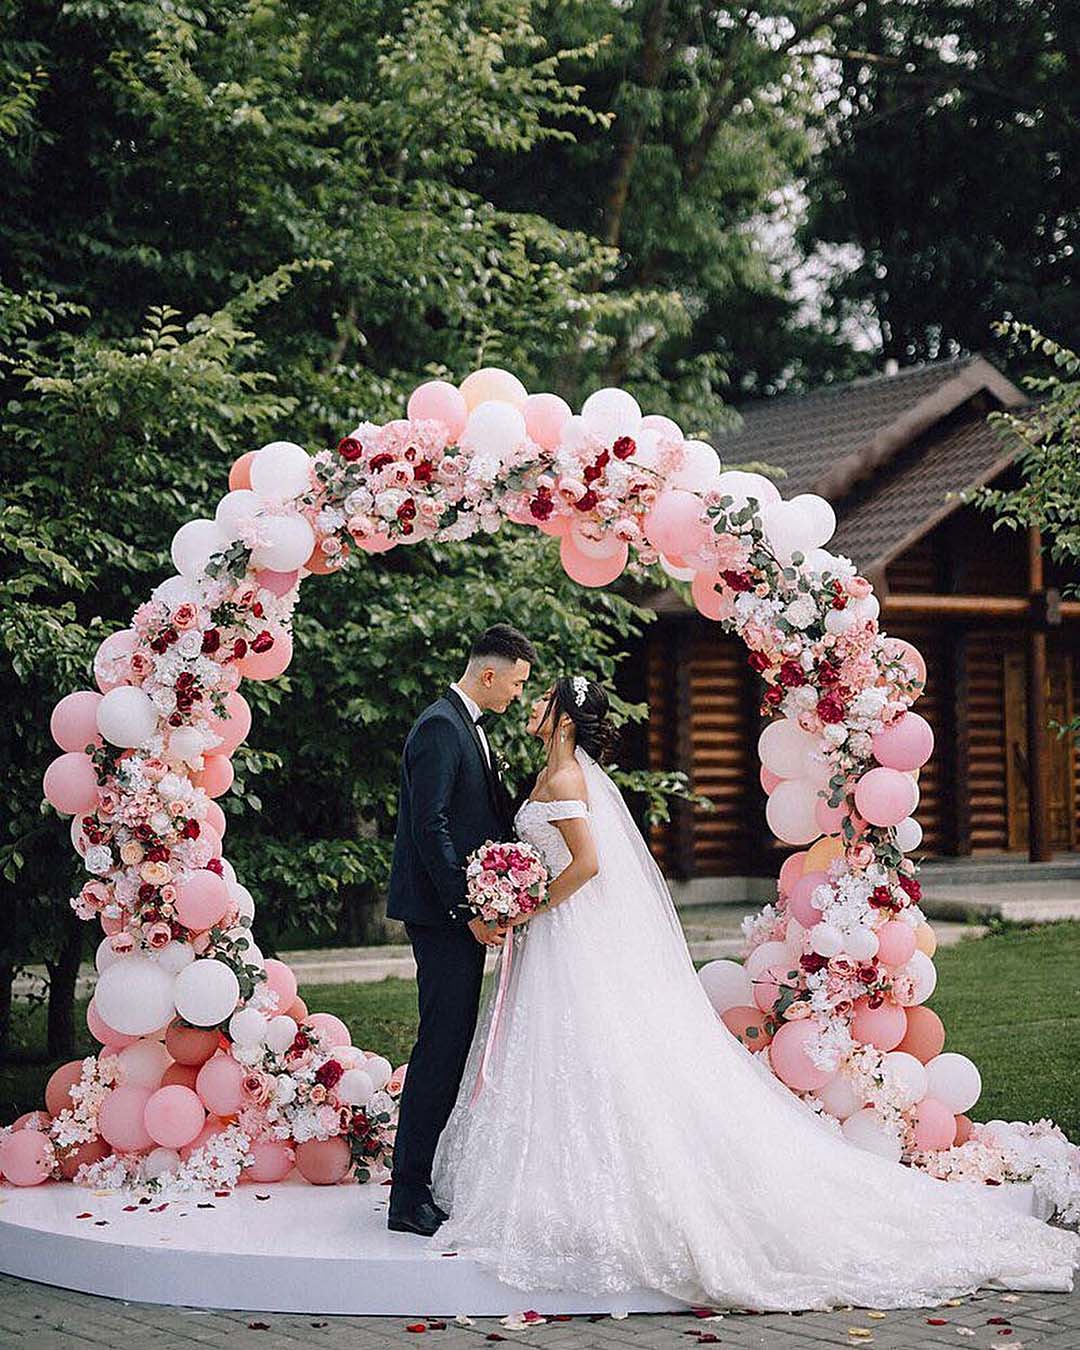 wedding trends wedding arch balloons with flowers